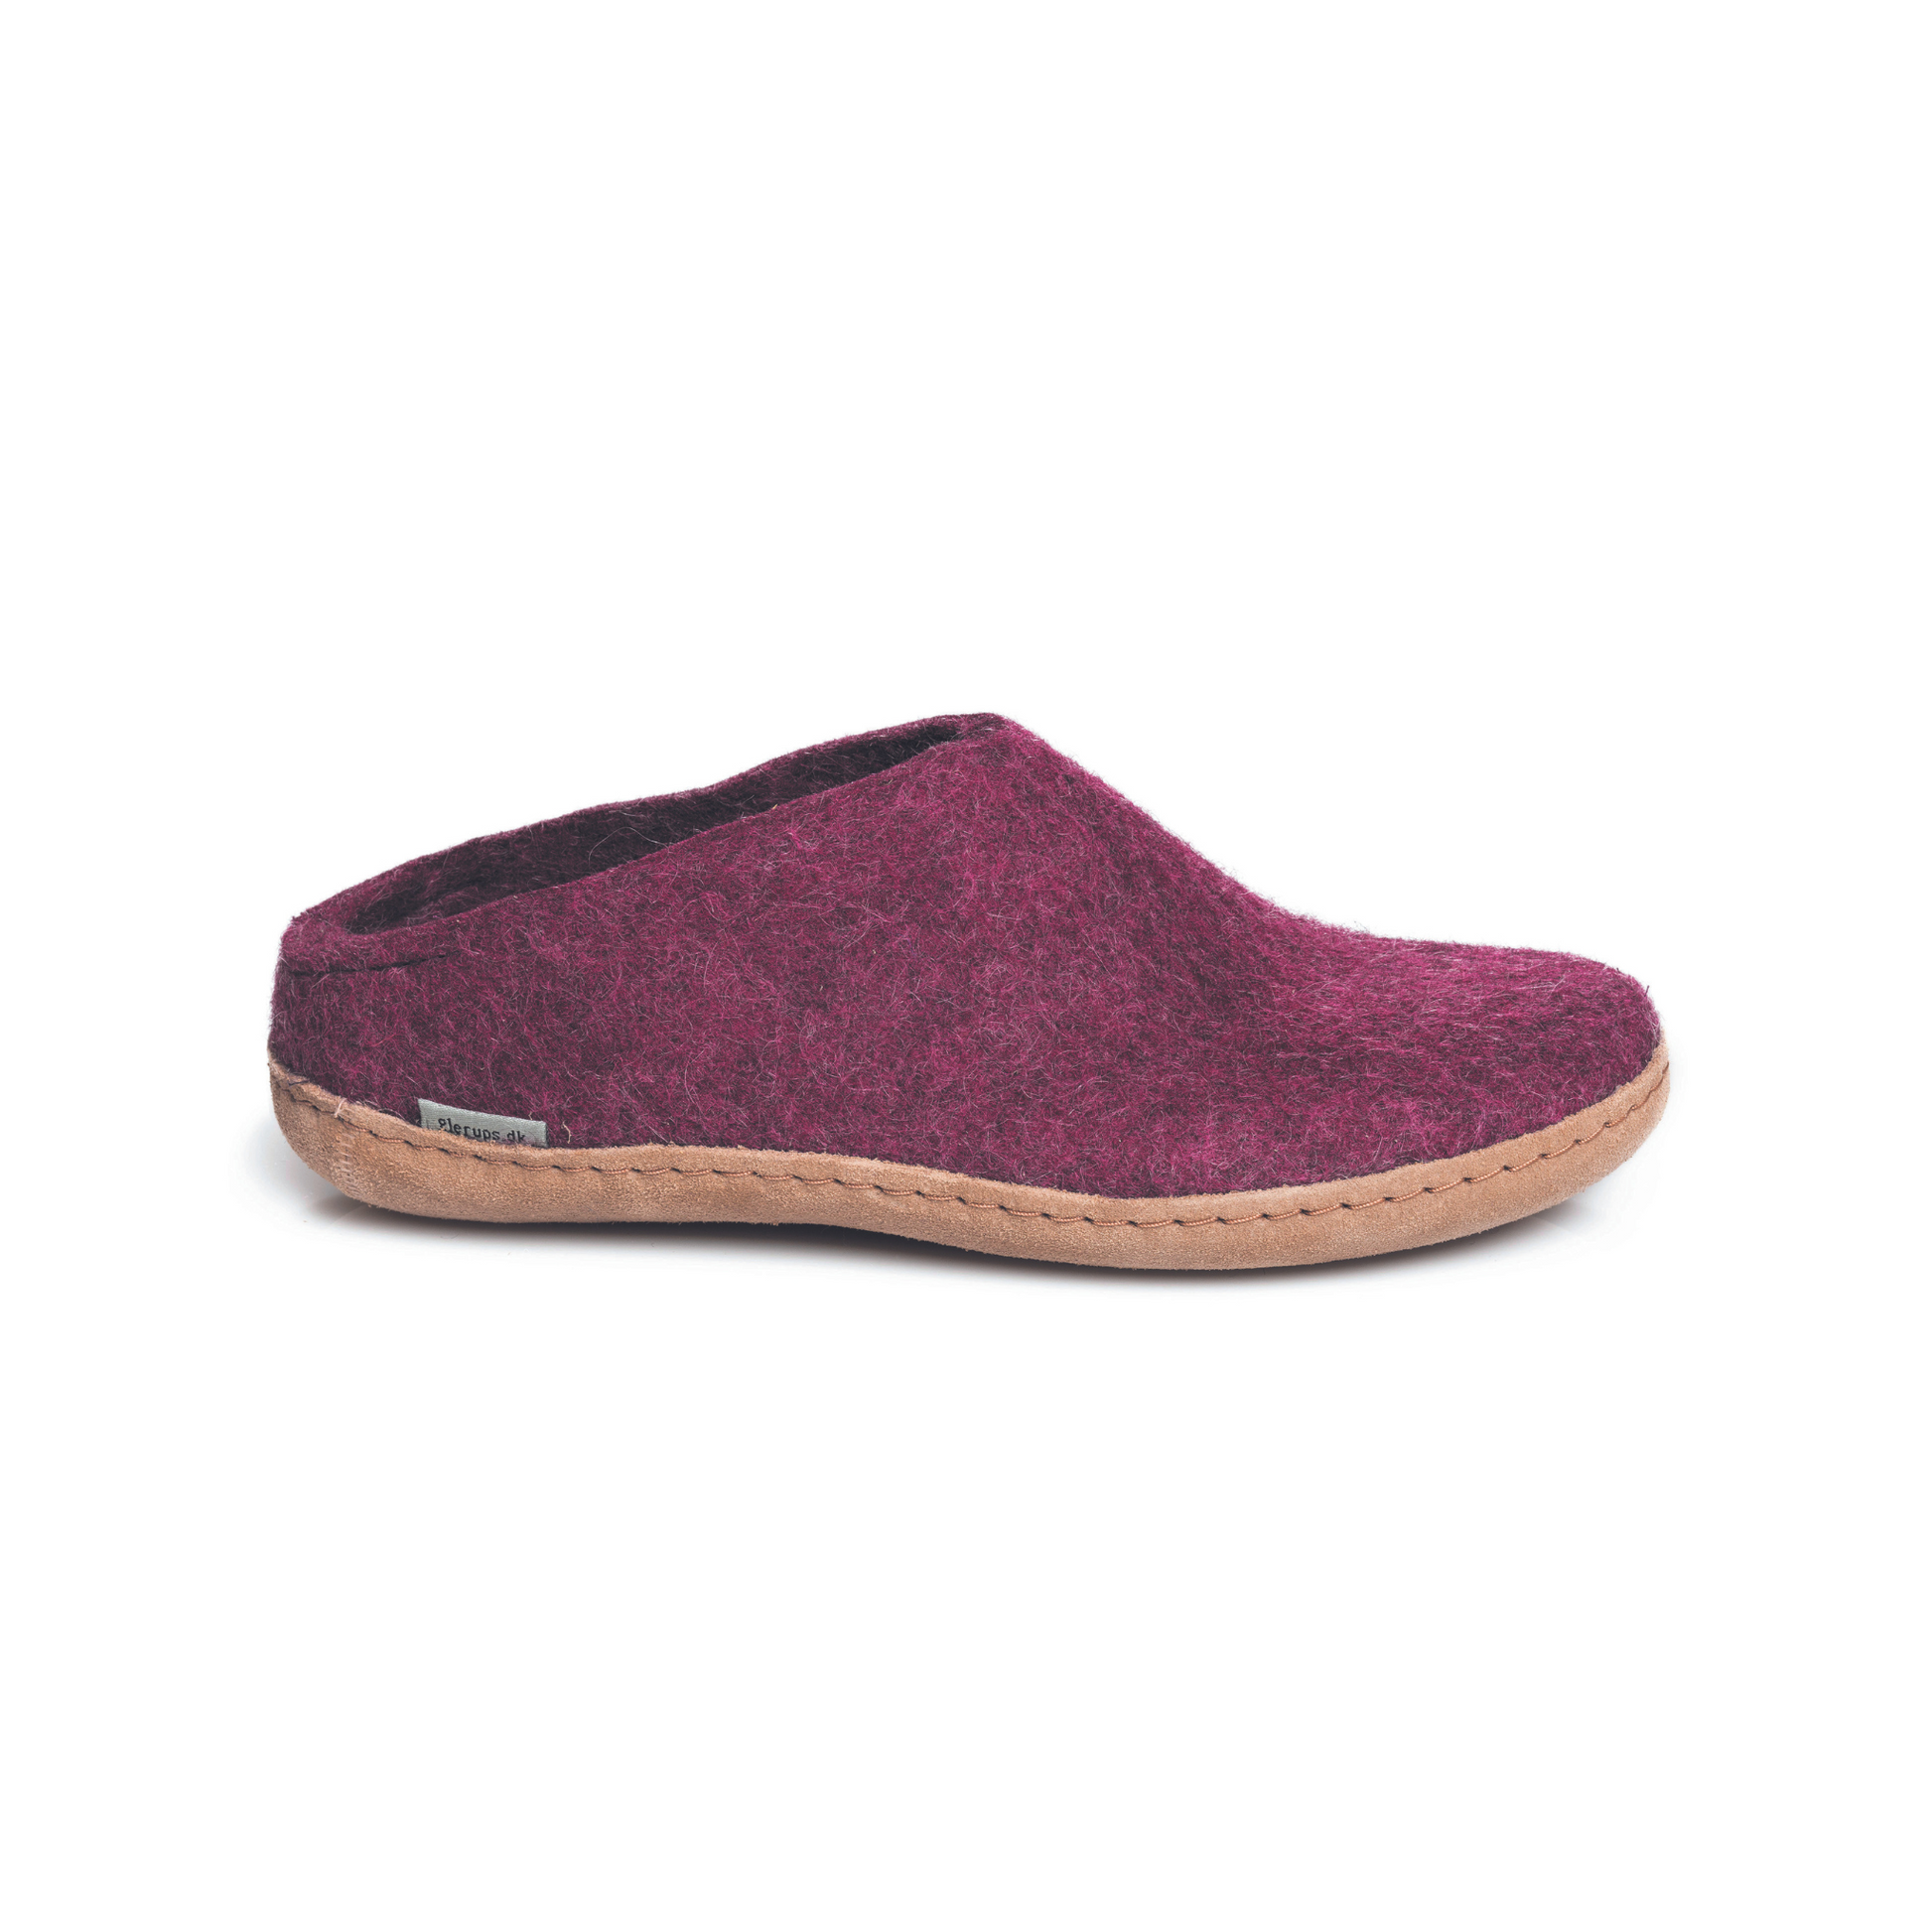 A deep-mauve slipper is pictured in profile, showing the low back of the heel. The bottom lined in tan leather has a small tag with the brand name attached in the seam where the leather meets the felted wool.